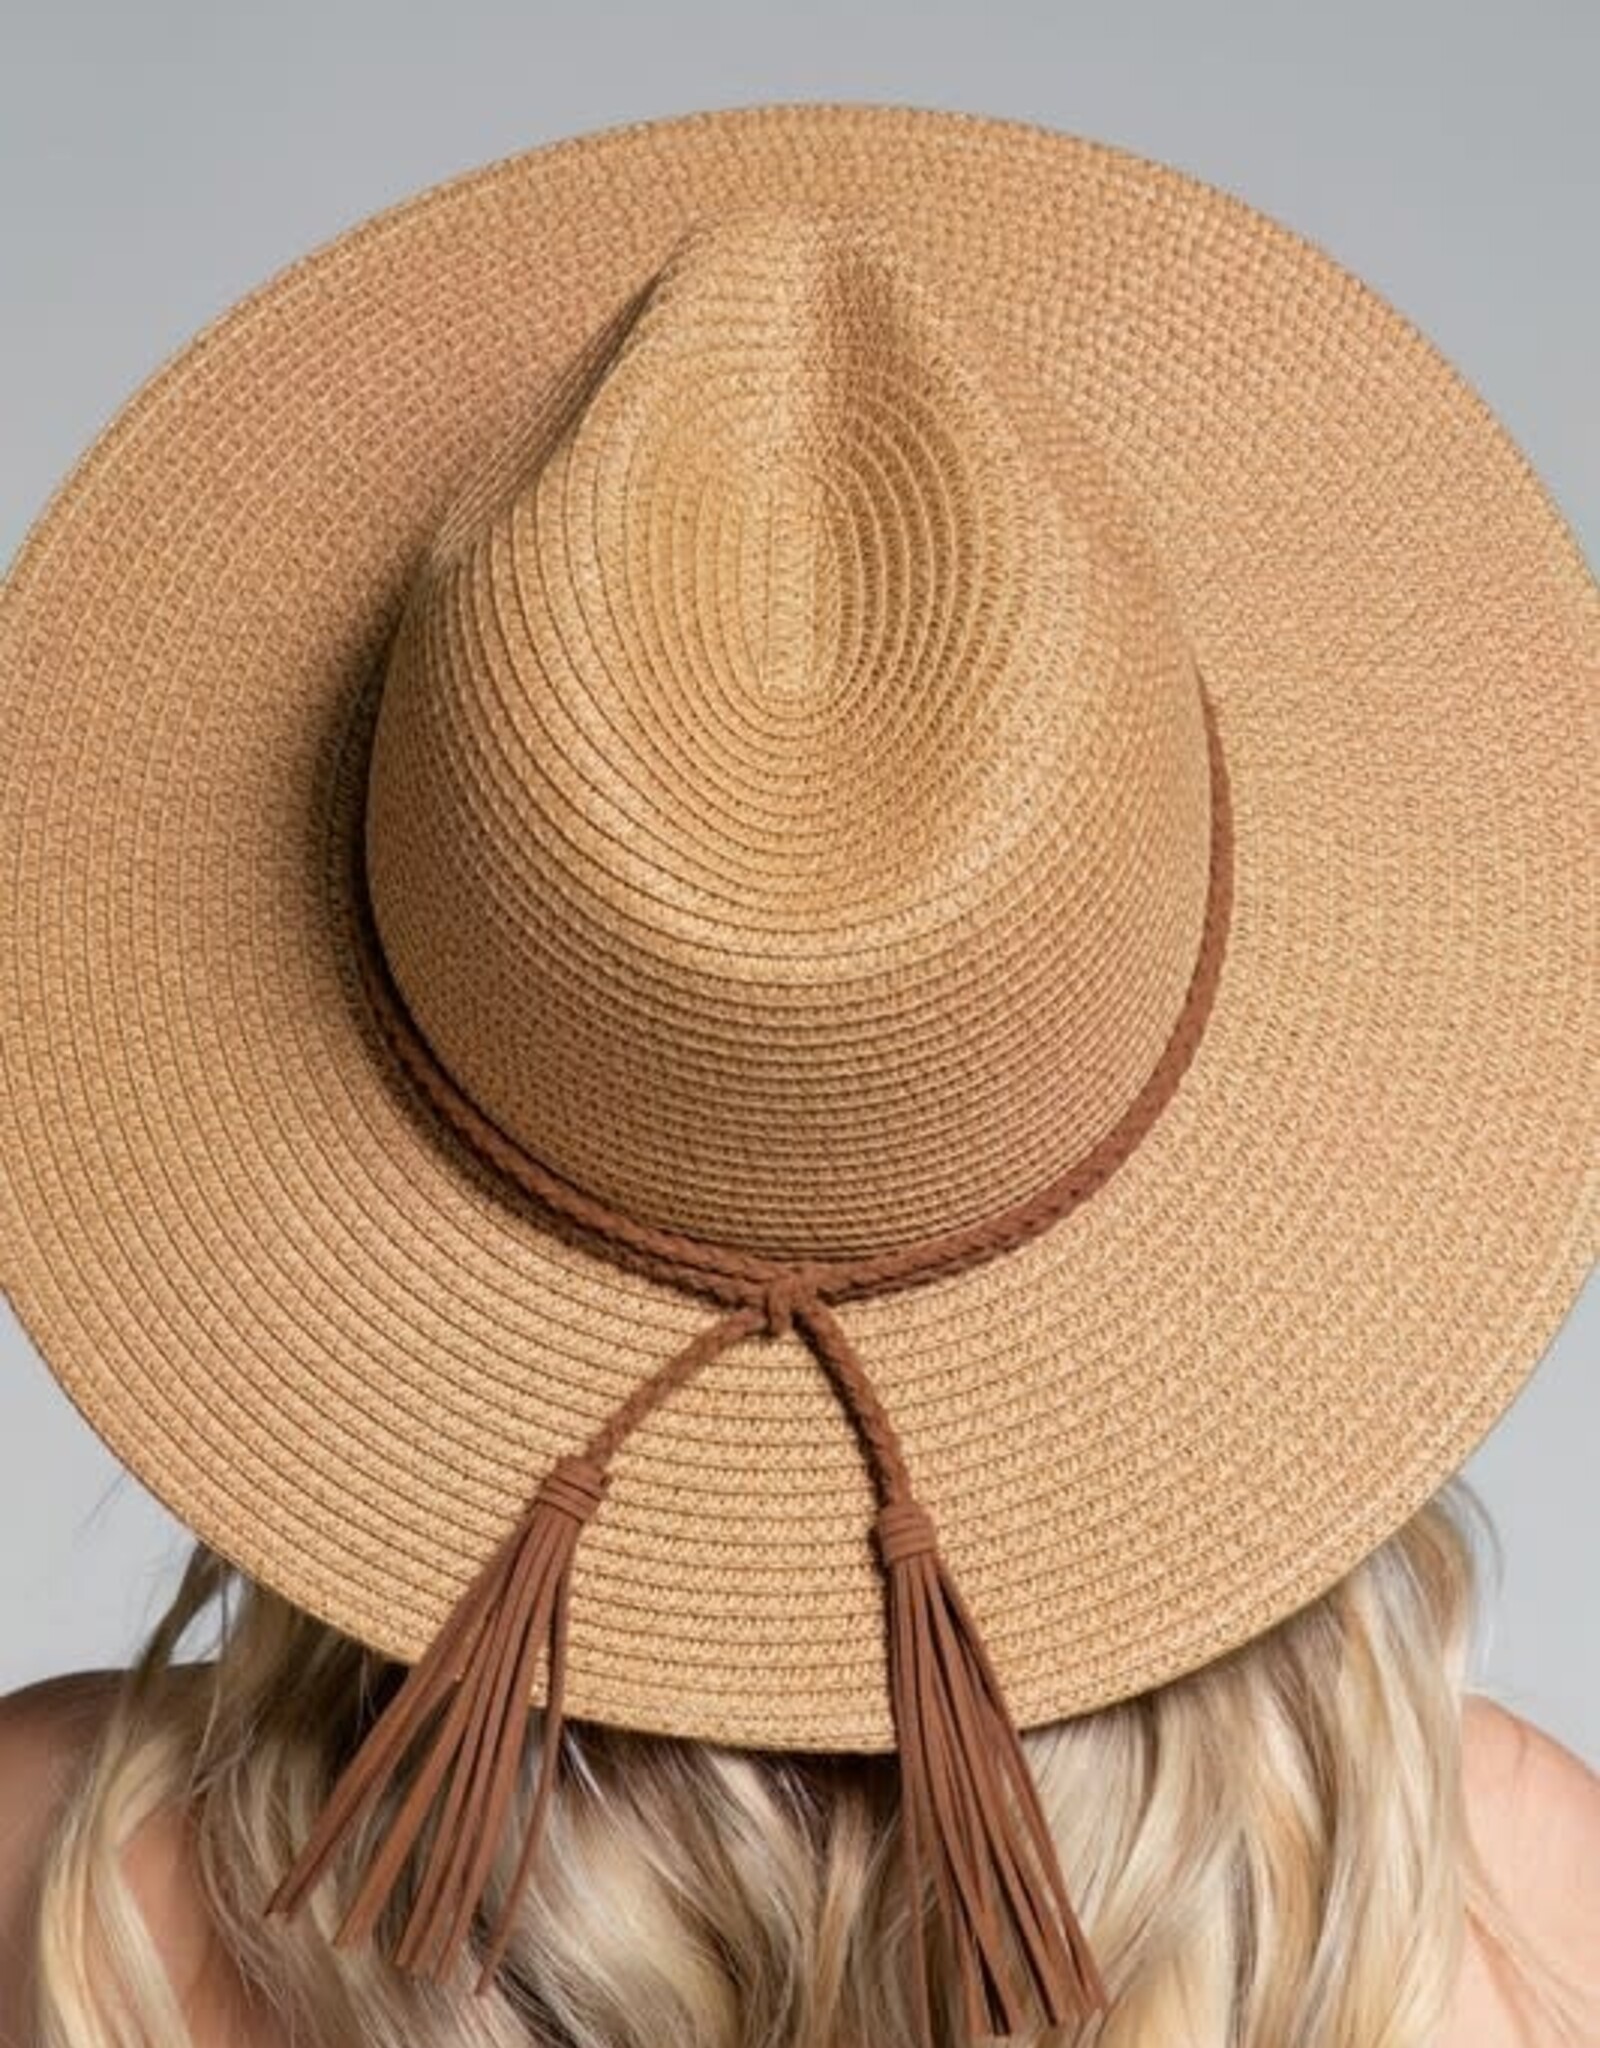 - Dark Natural Panama Woven with Braided Band Hat